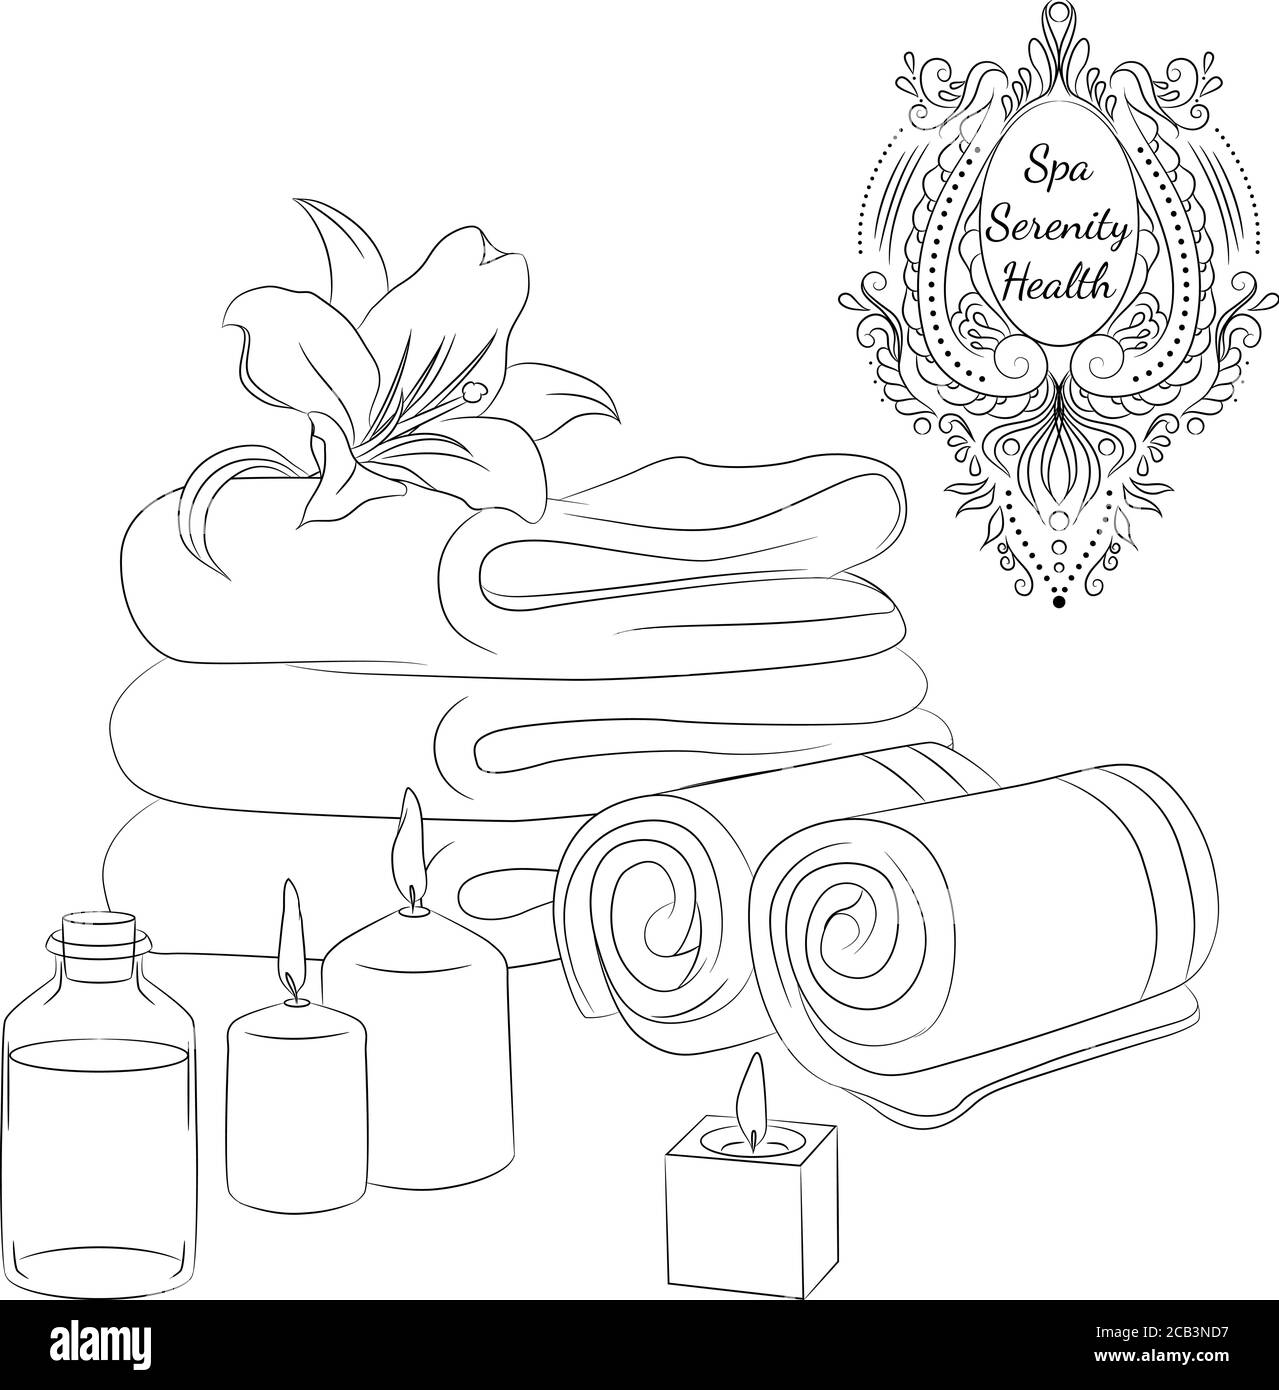 Vector illustration with bath towels and spa accessories. Line art isolated on white background. Design for a spa, massage and beauty salon, organic health care products Stock Vector